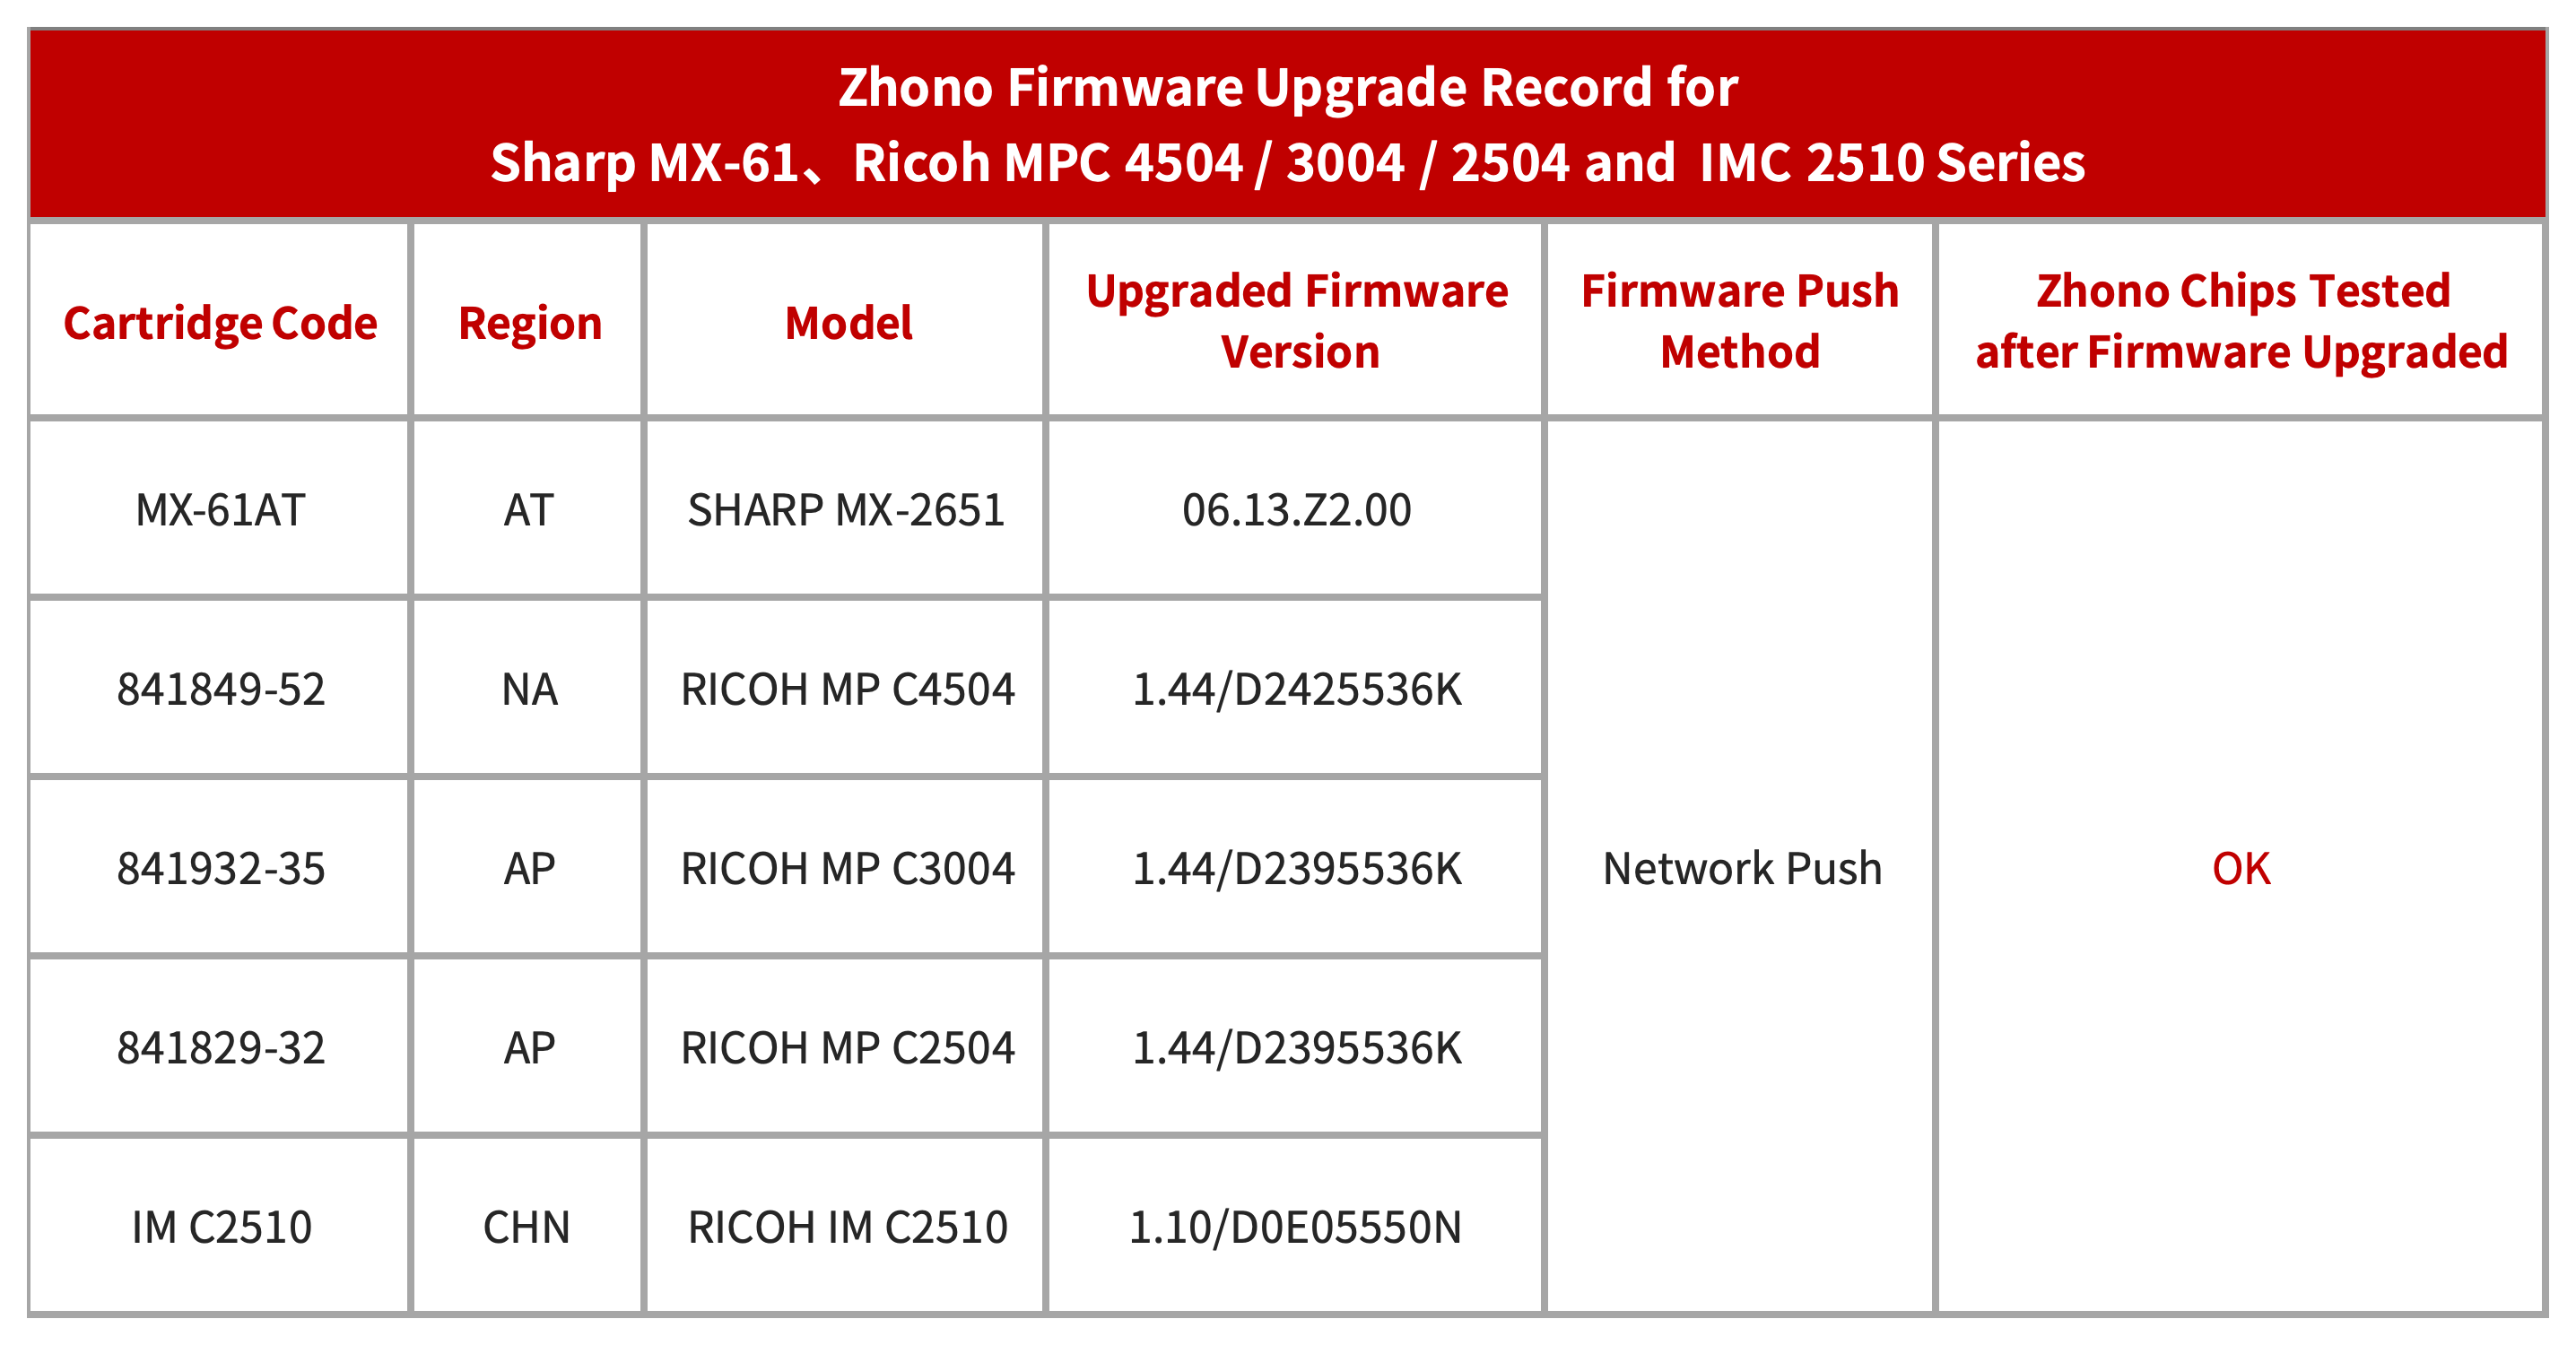 Zhono Responses to Sharp and Ricoh Firmware Upgrade